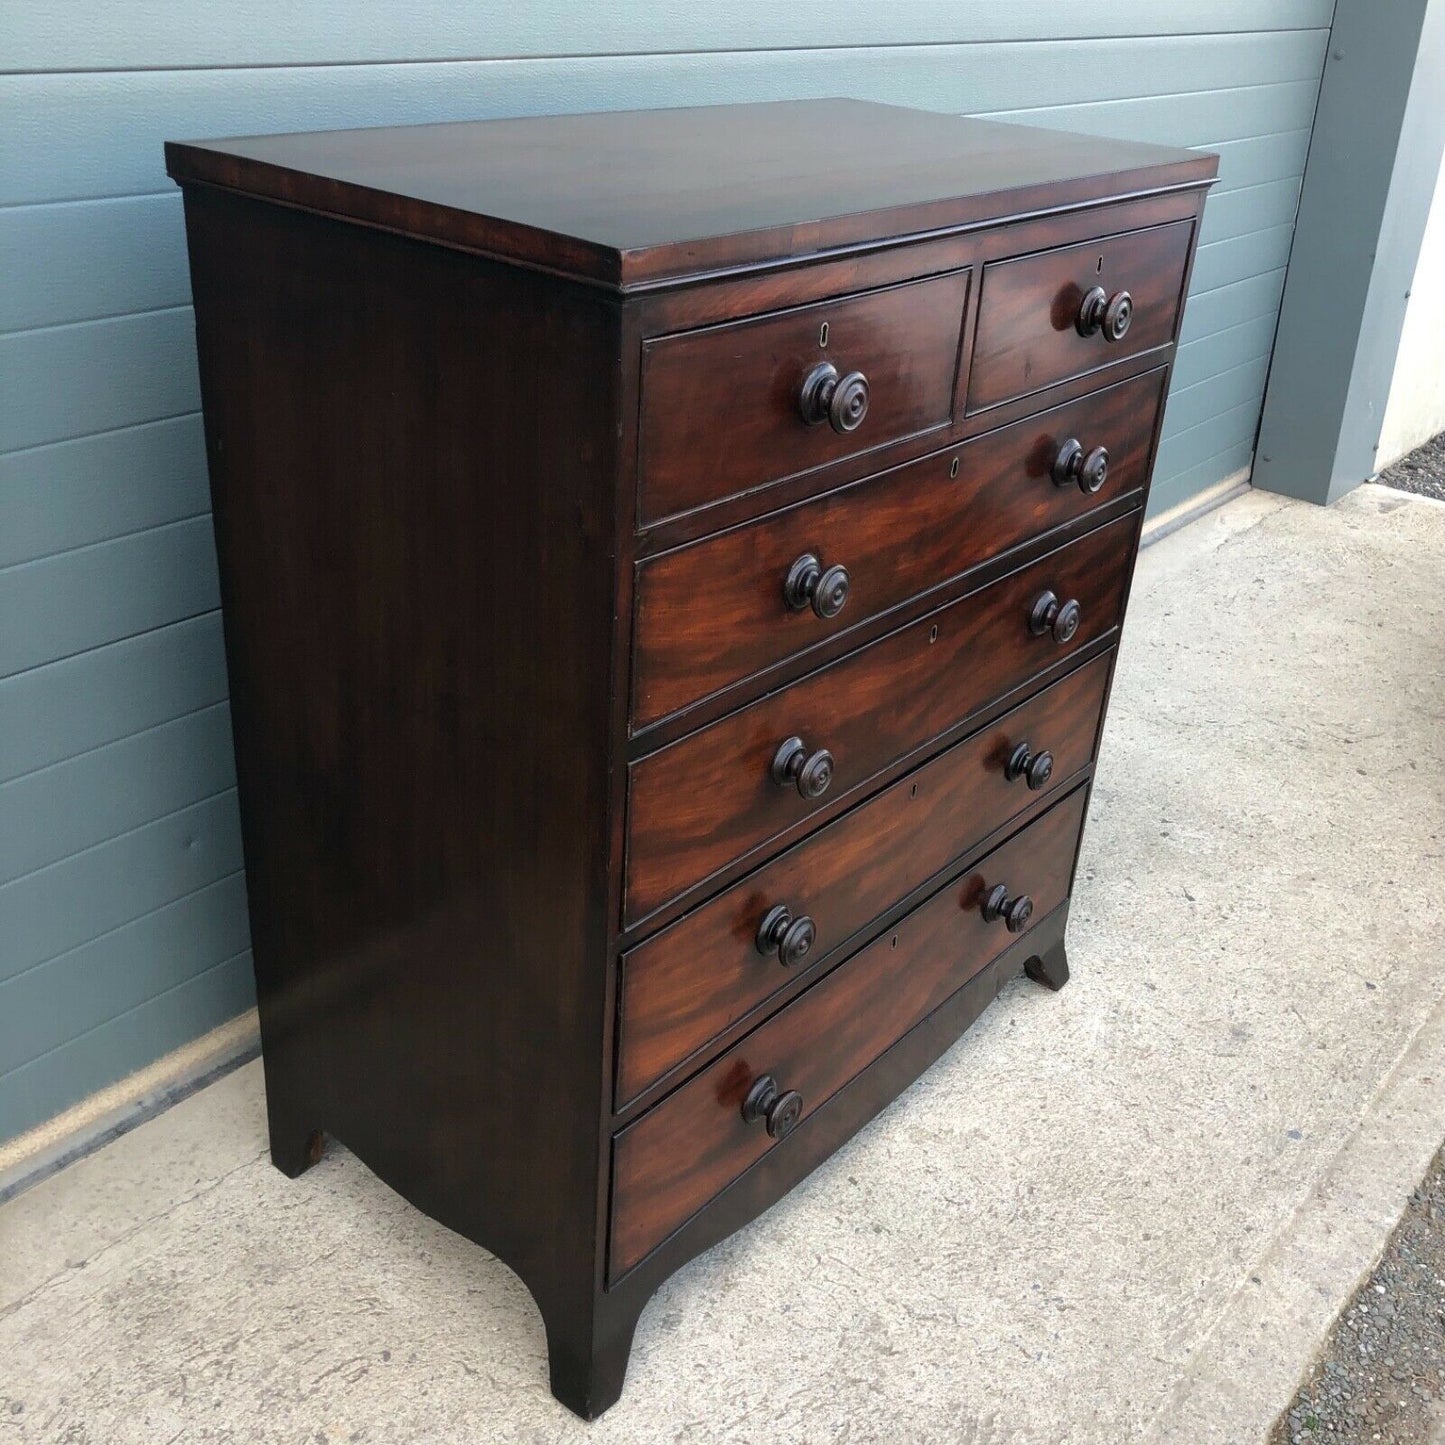 Stunning Regency Mahogany Chest Of Drawers / Antique Chest ( SOLD )